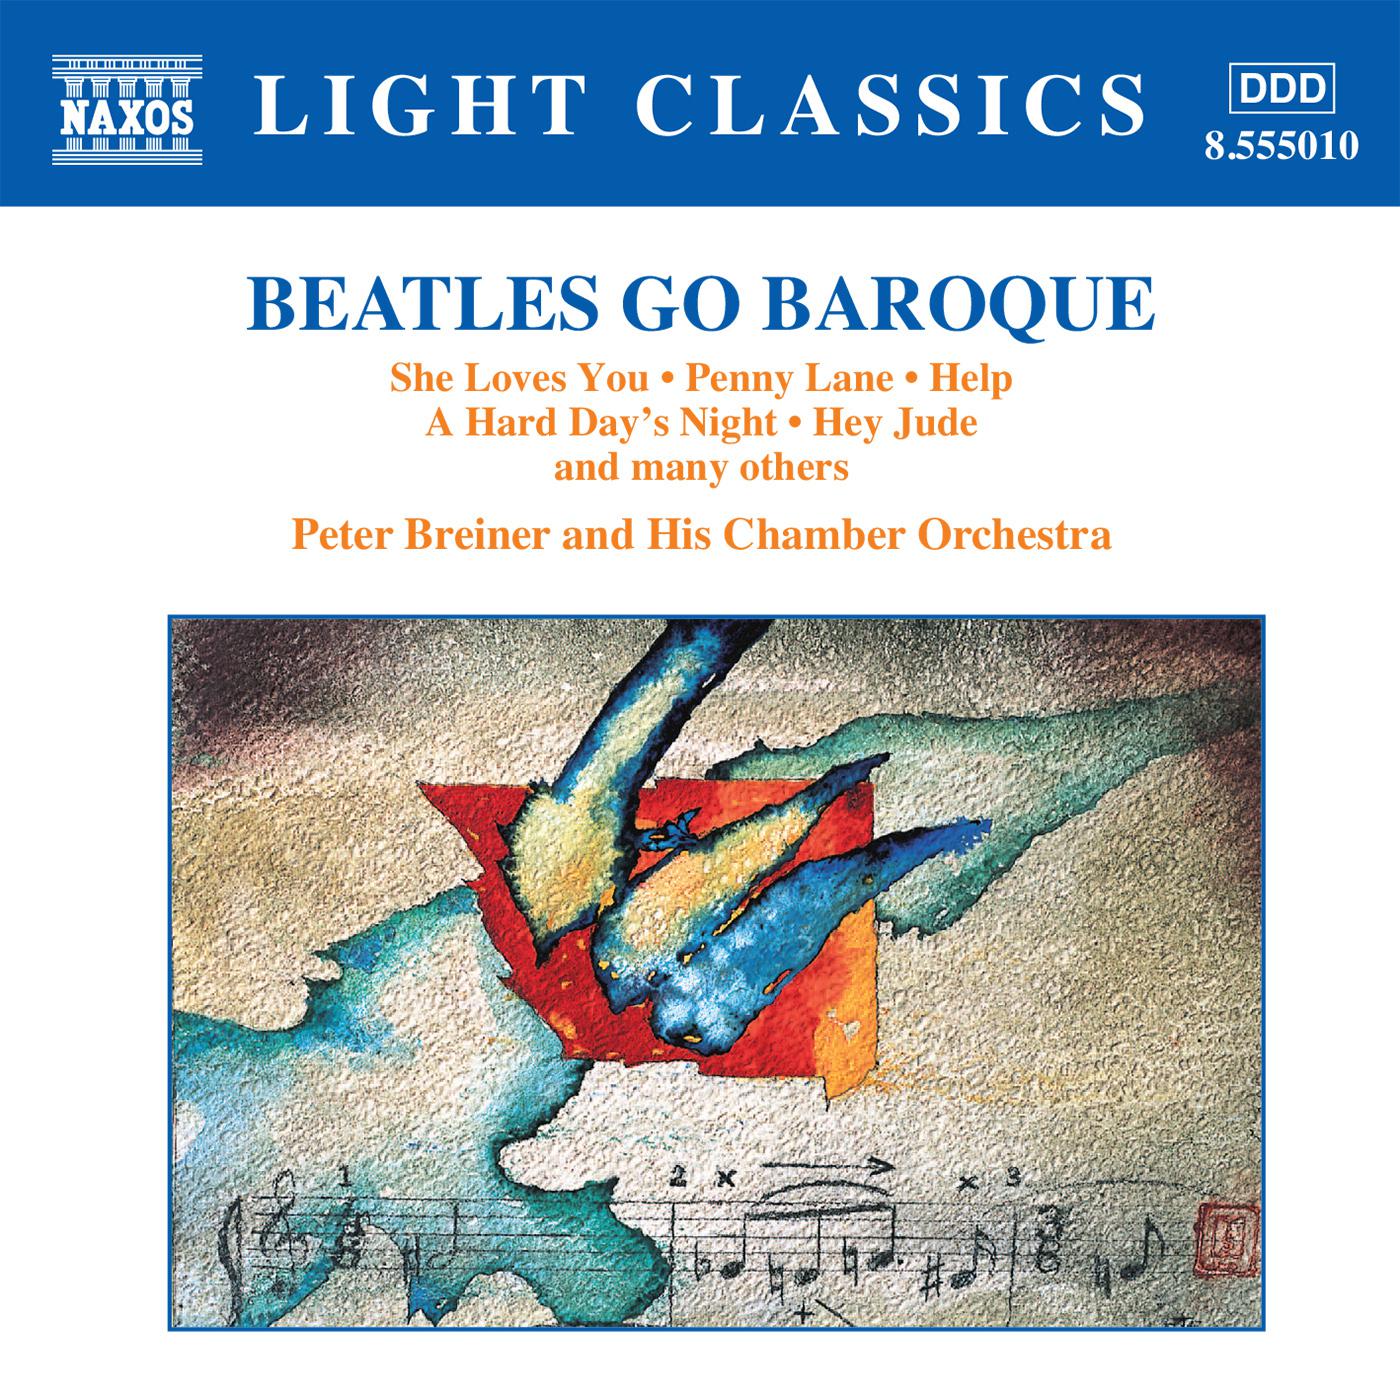 Beatles Concerto Grosso No. 3 (In the style of J. S. Bach): II. Eight Days a Week: Rondeau